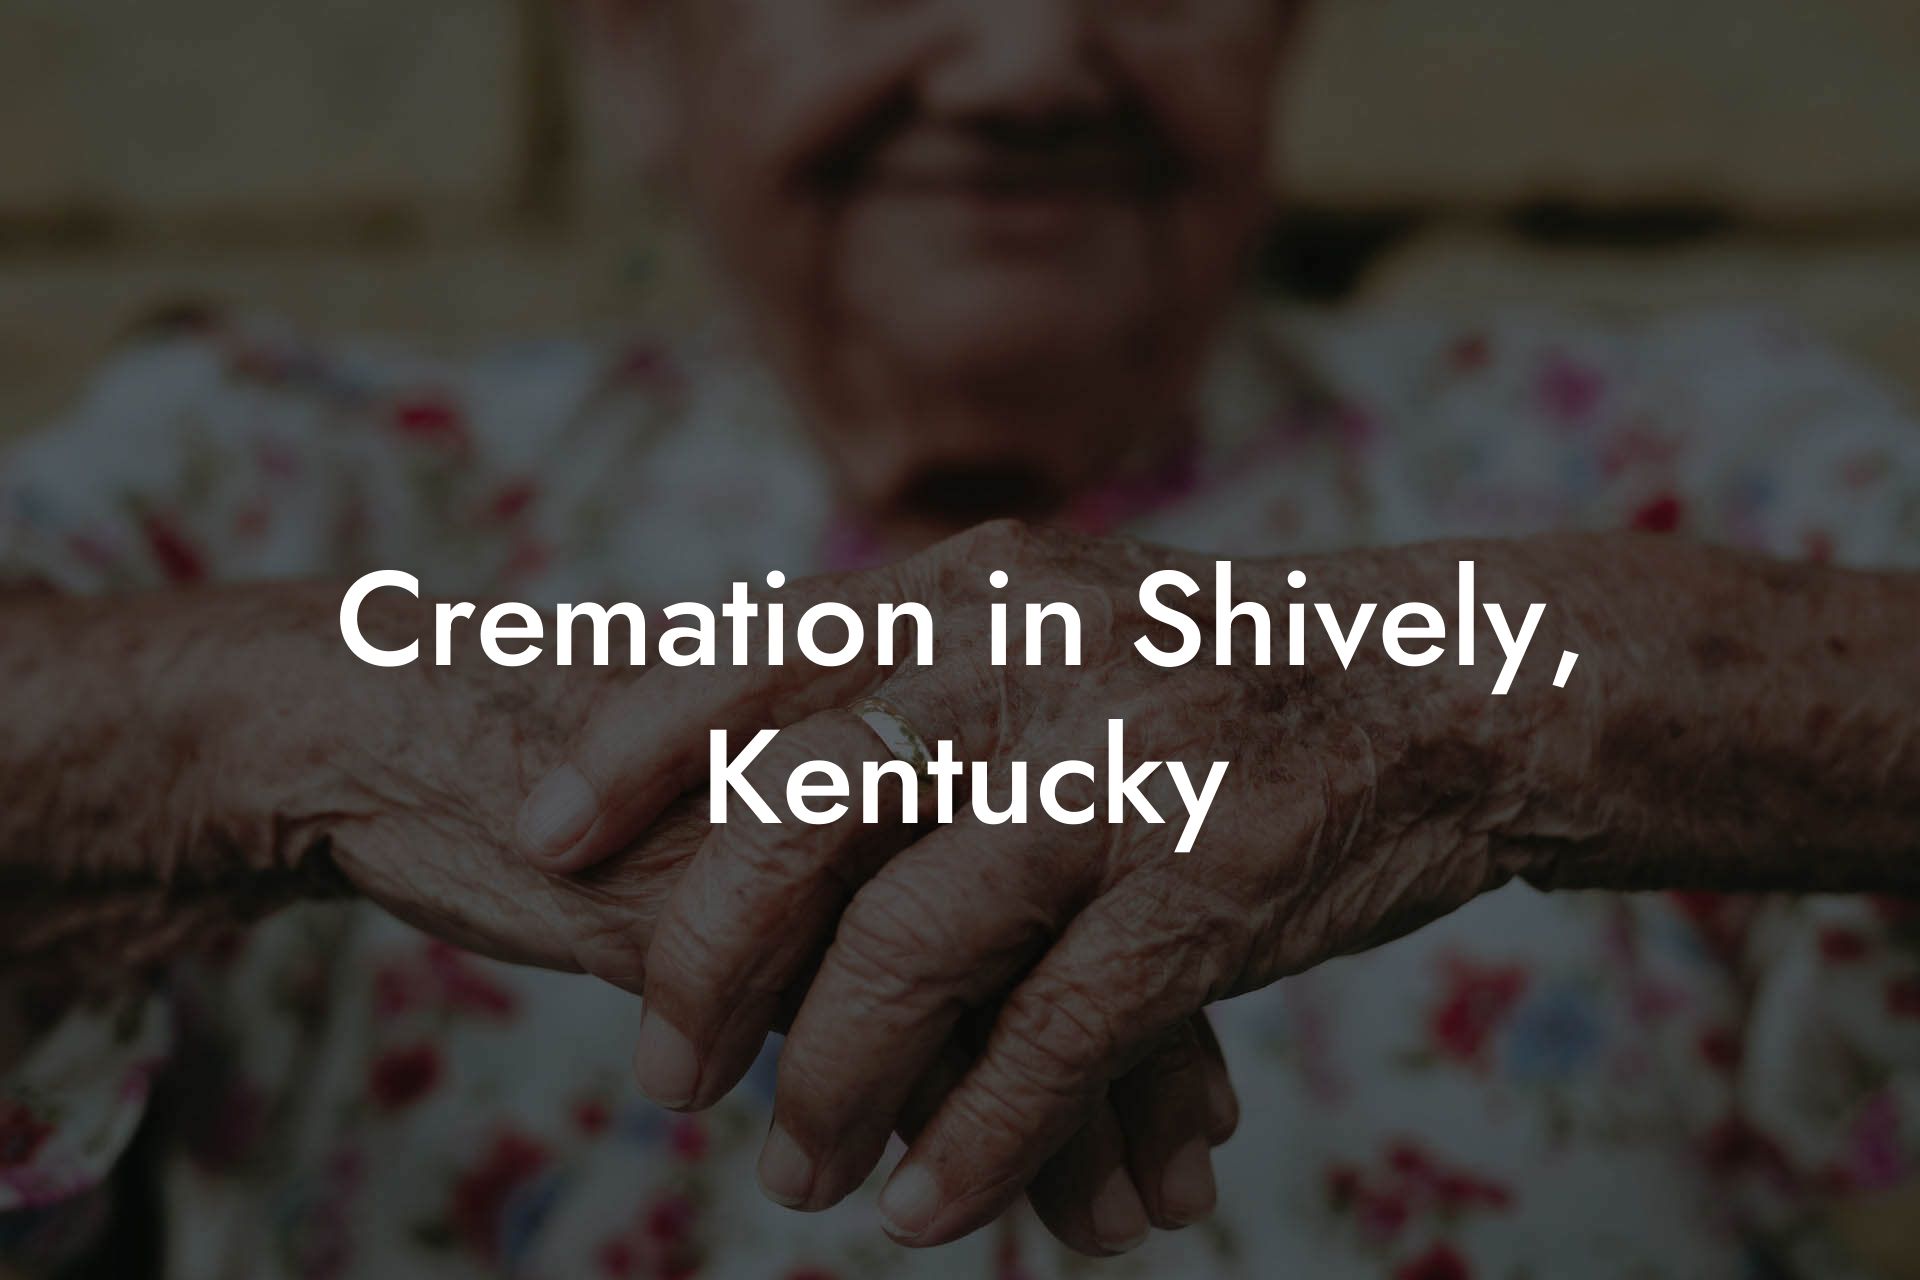 Cremation in Shively, Kentucky